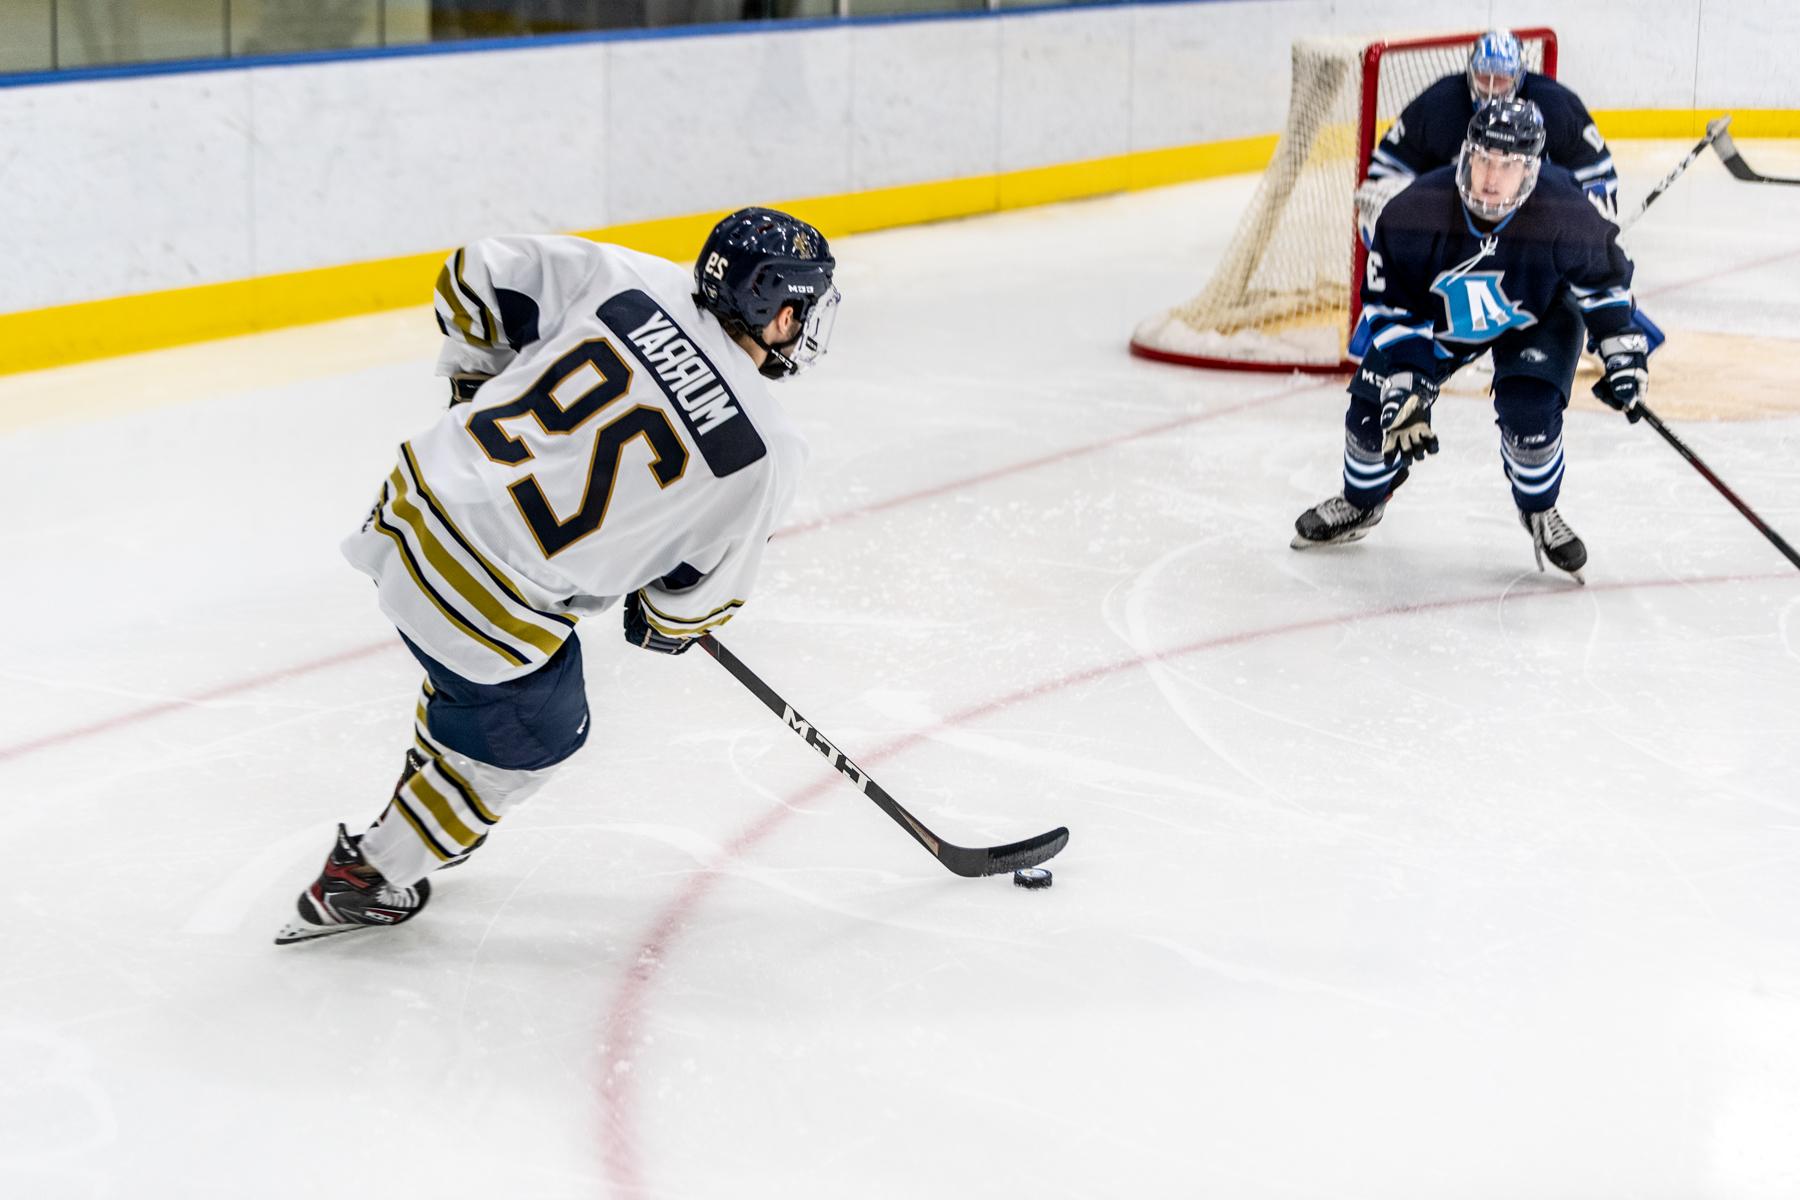 Trinity College mens Hockey player competing on ice